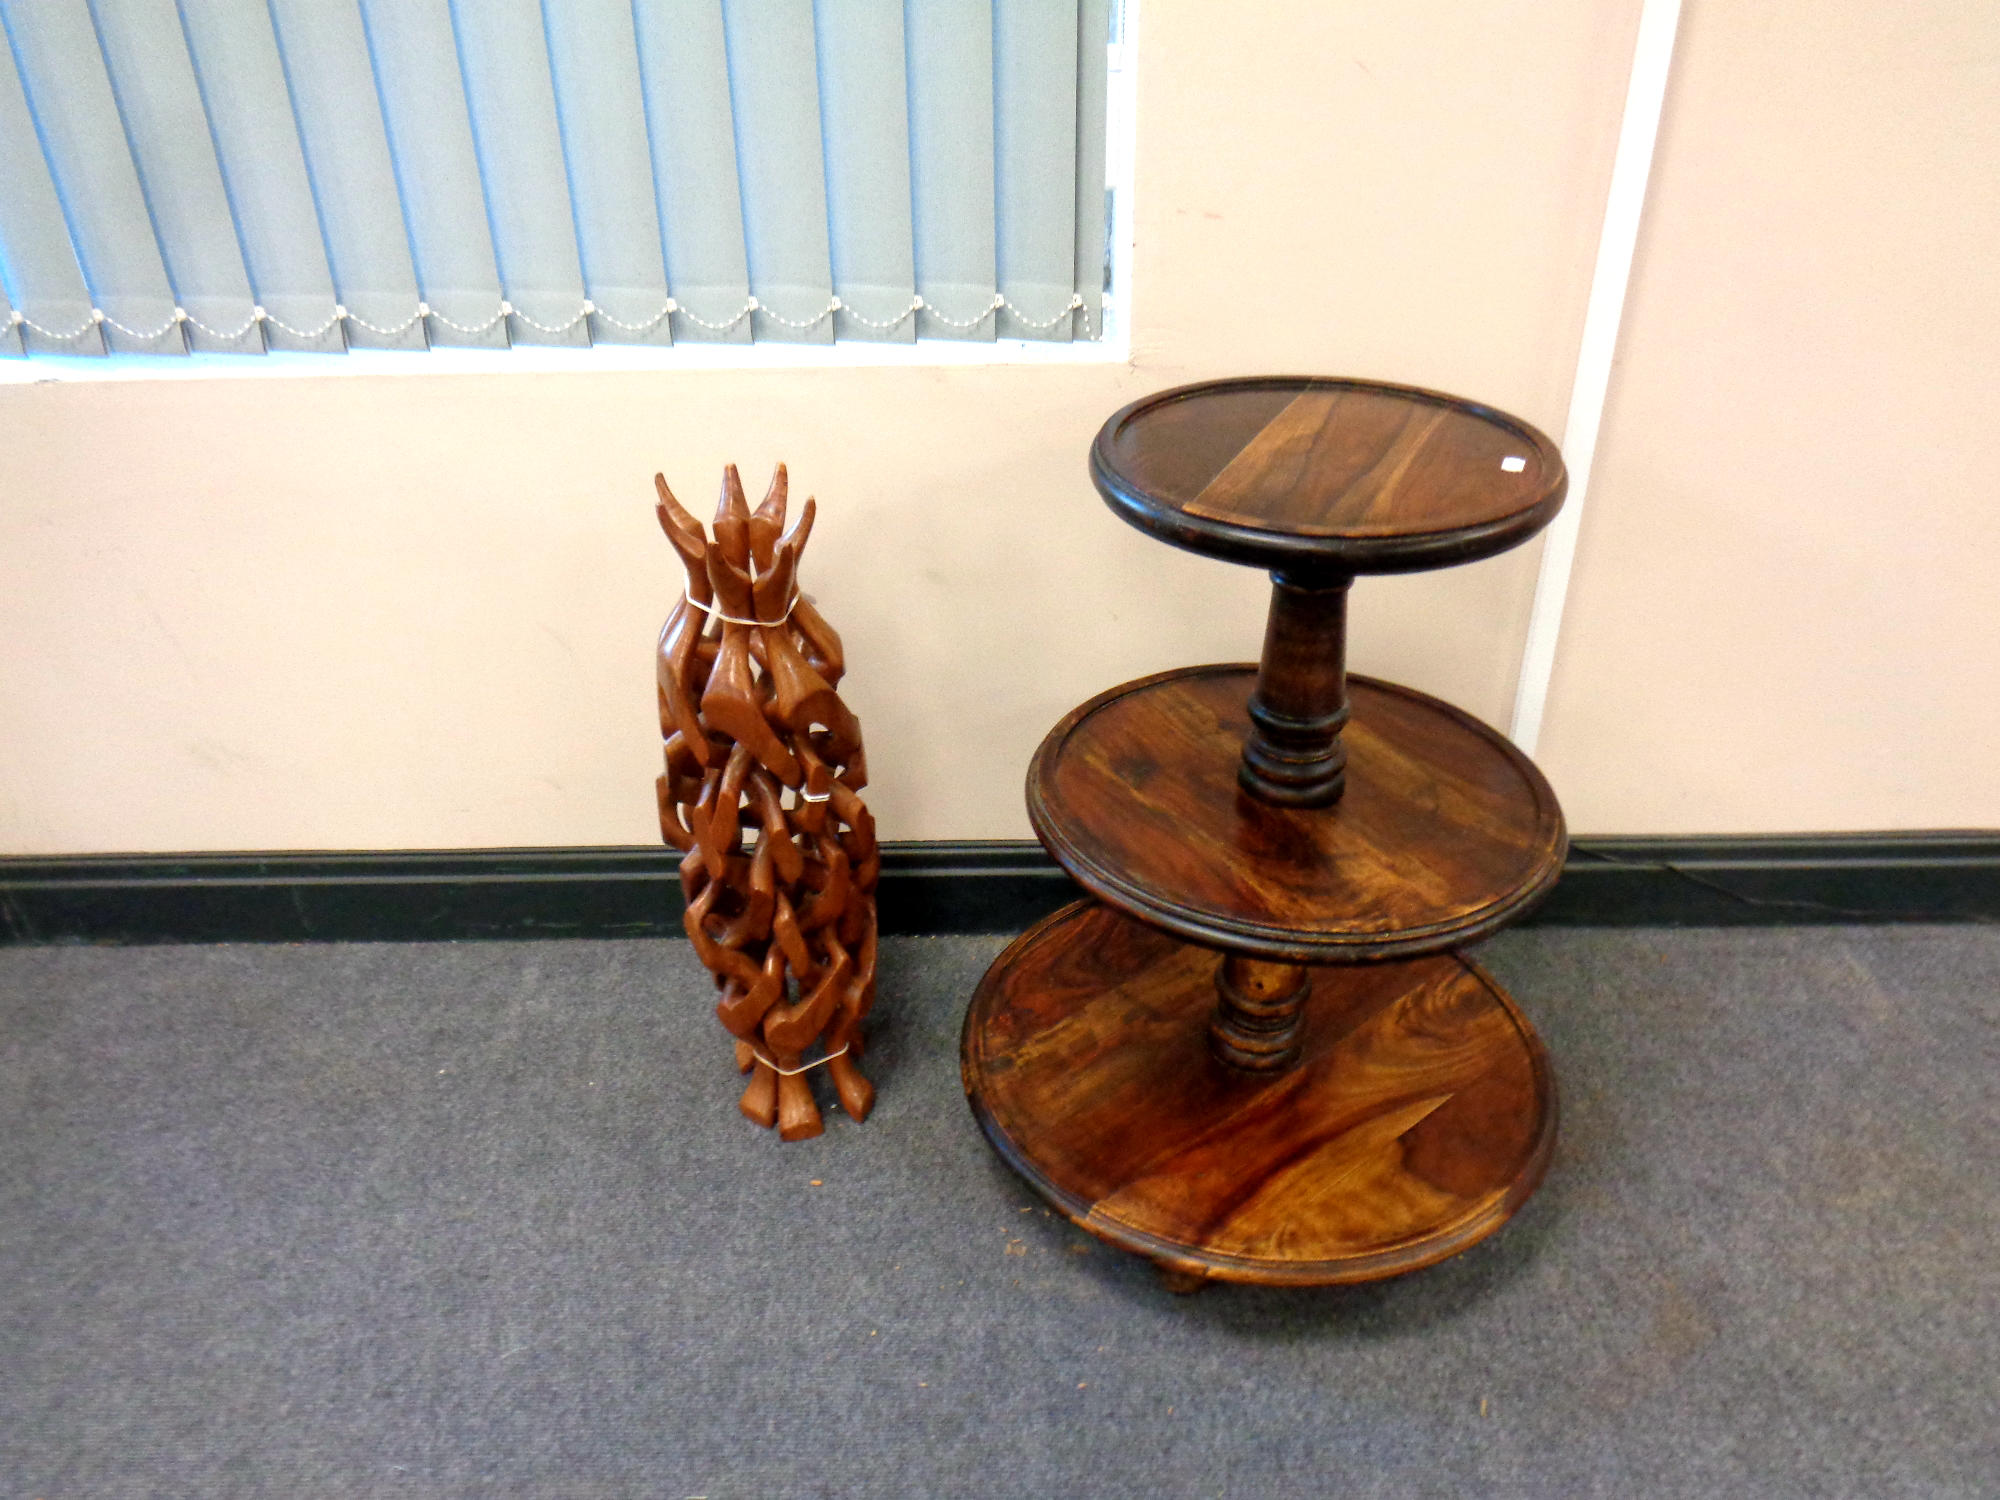 A three tier hardwood occasional table together with an African wooden table stand